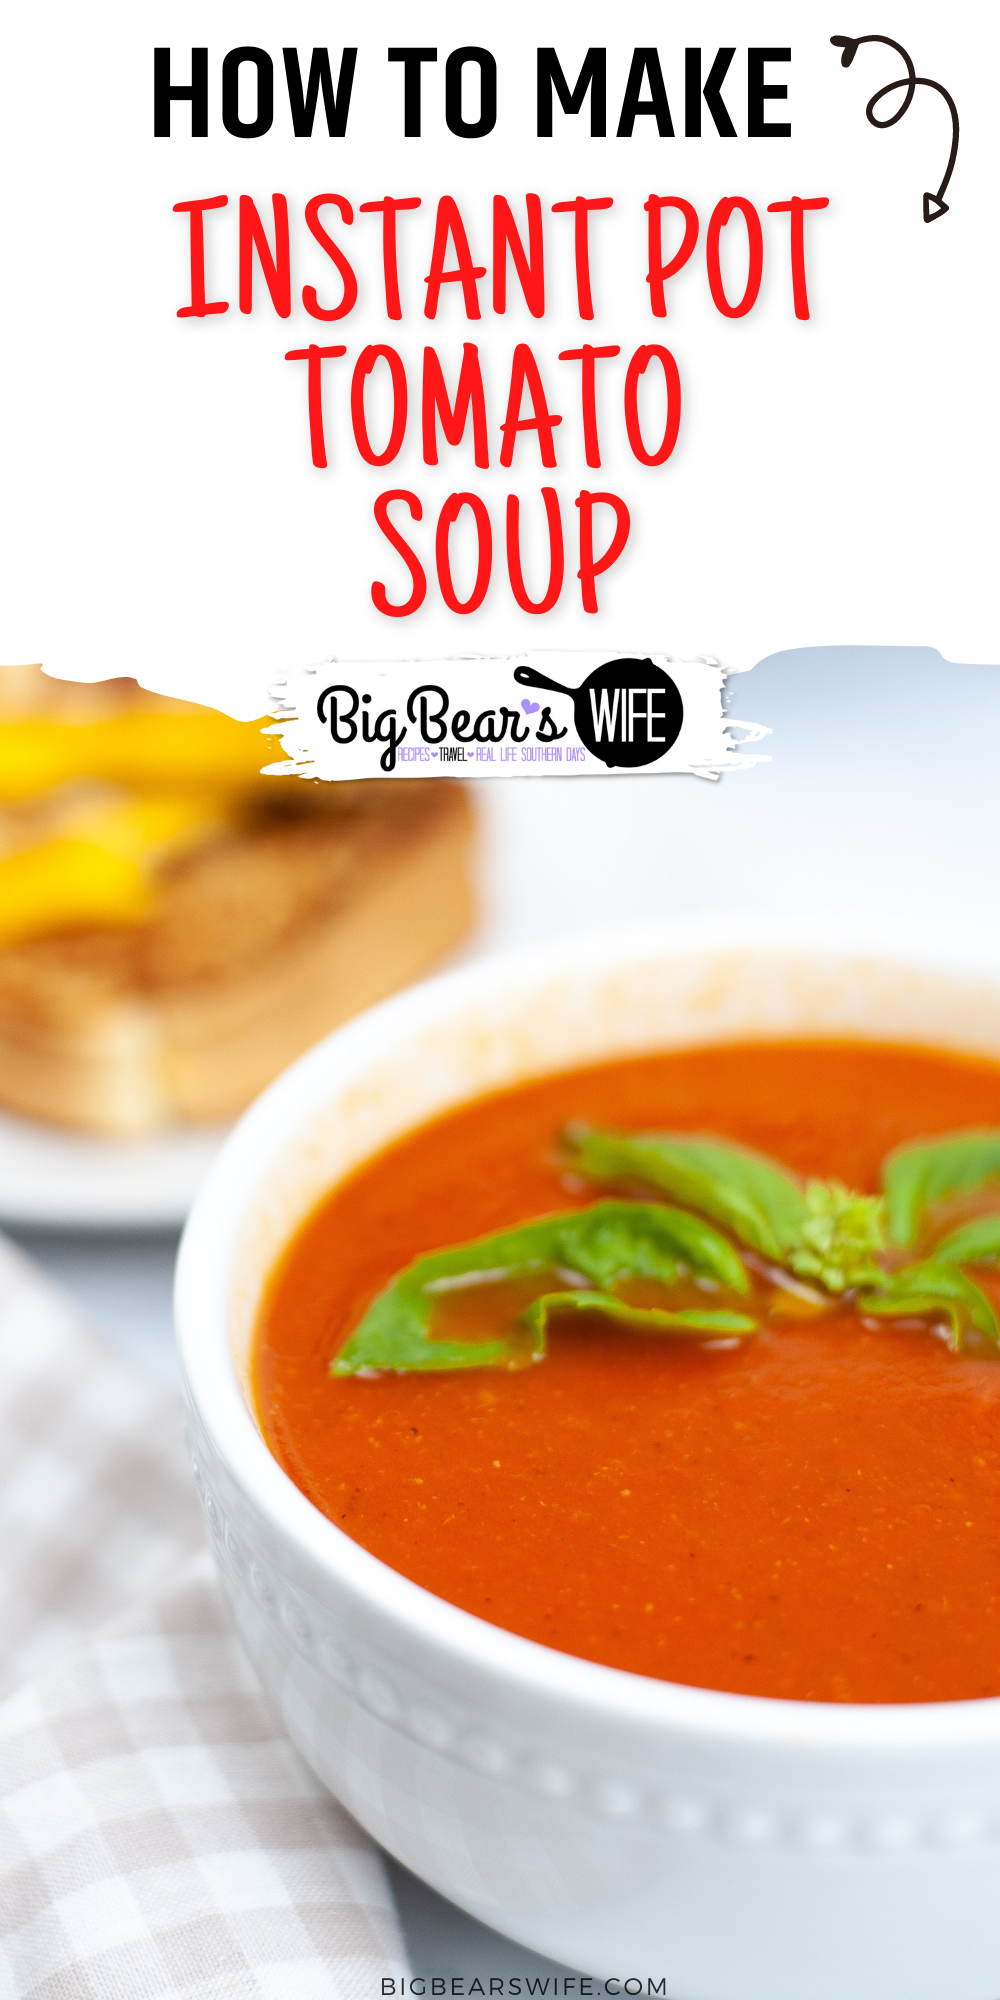 This Instant Pot Tomato Soup recipe is a great soup to make in the Instant Pot and only takes about 45 minutes to come together for a great lunch or dinner! Perfect to serve with grilled cheese sandwiches!  via @bigbearswife